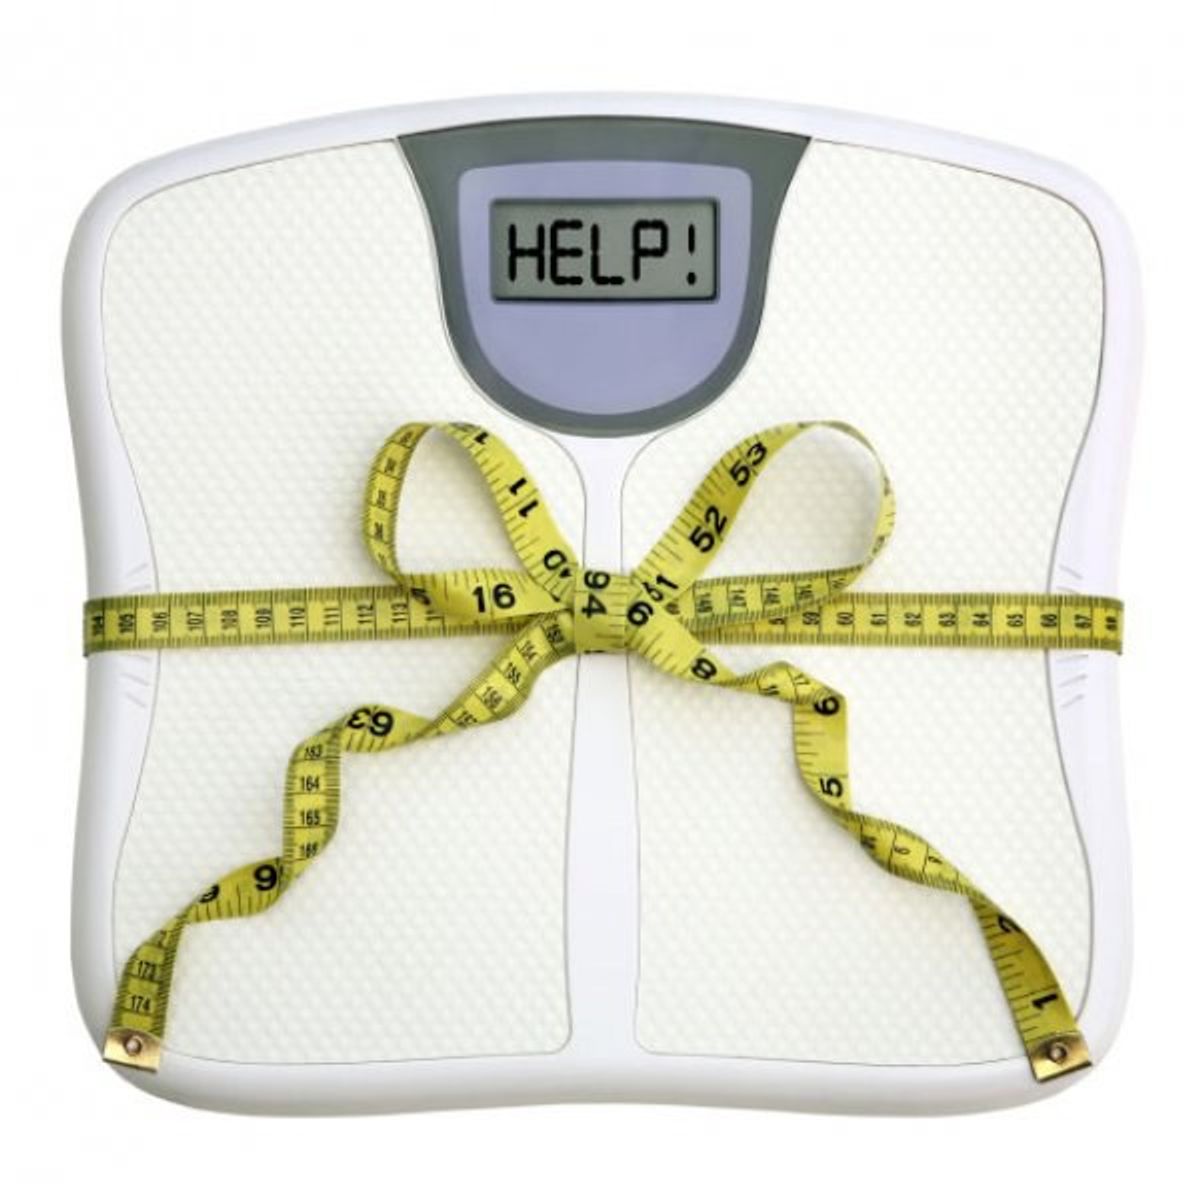 Is It Time To Get Rid Of The Scale?